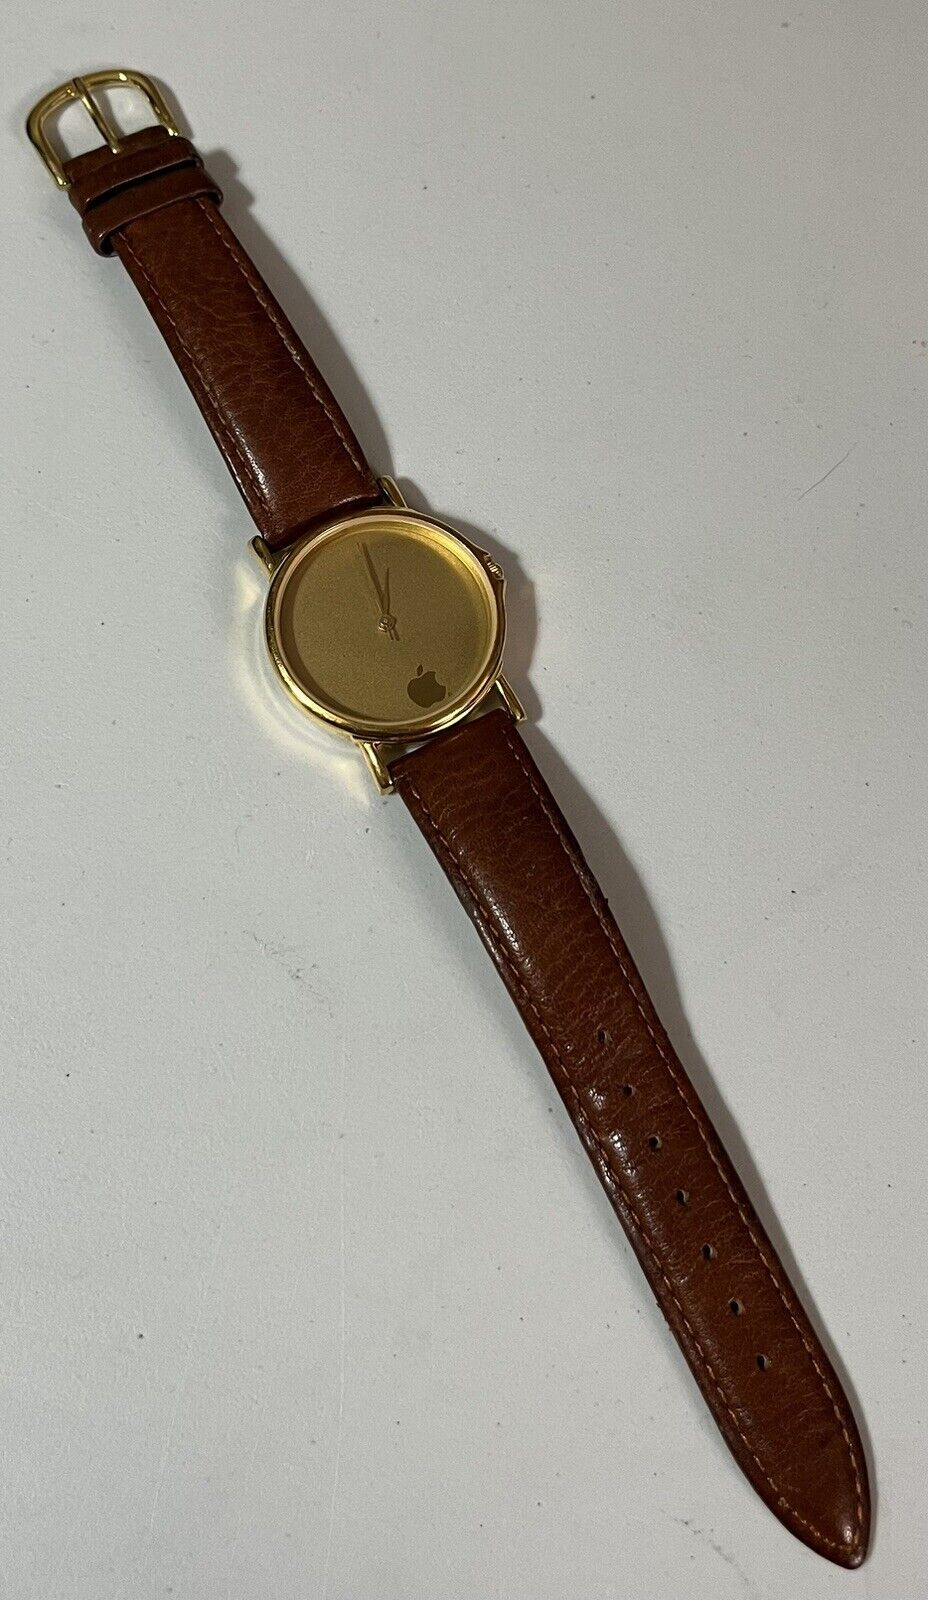 VTG 90s Apple Computer Education Division Golden Apple Club Employee Award Watch